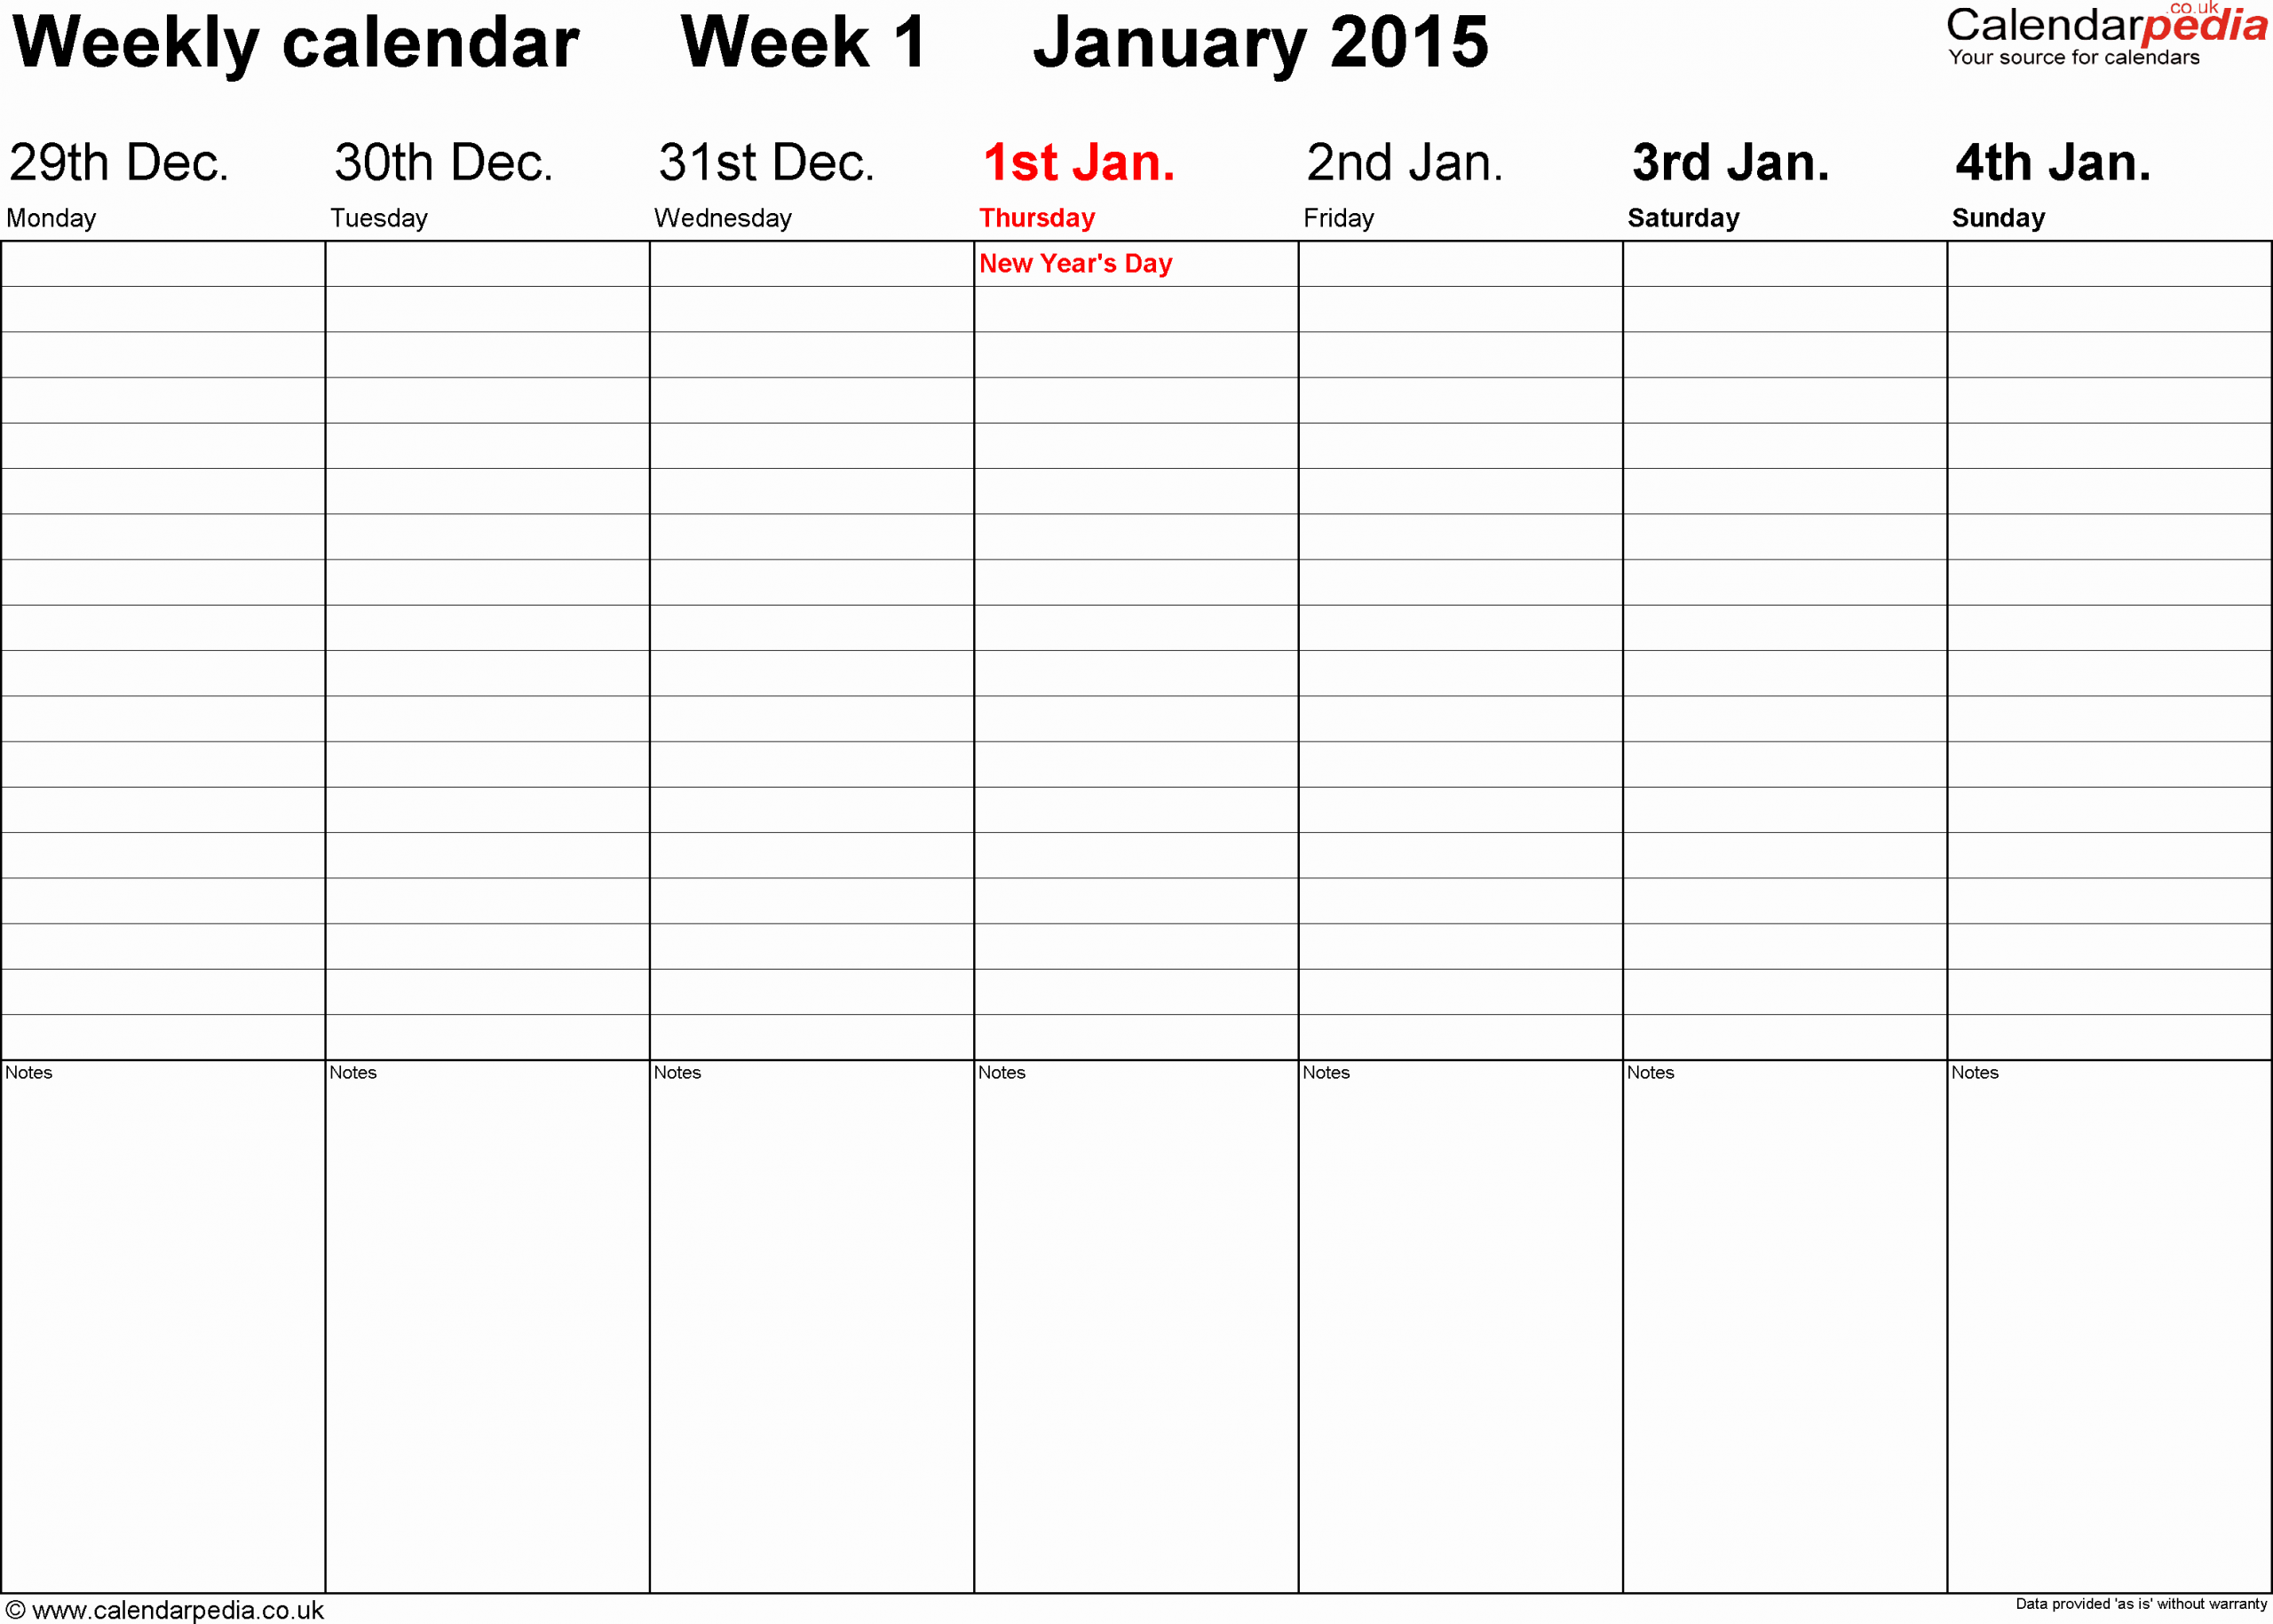 One Day Schedule Template Unique Weekly Calendar 2015 Uk Free Printable Templates for Word